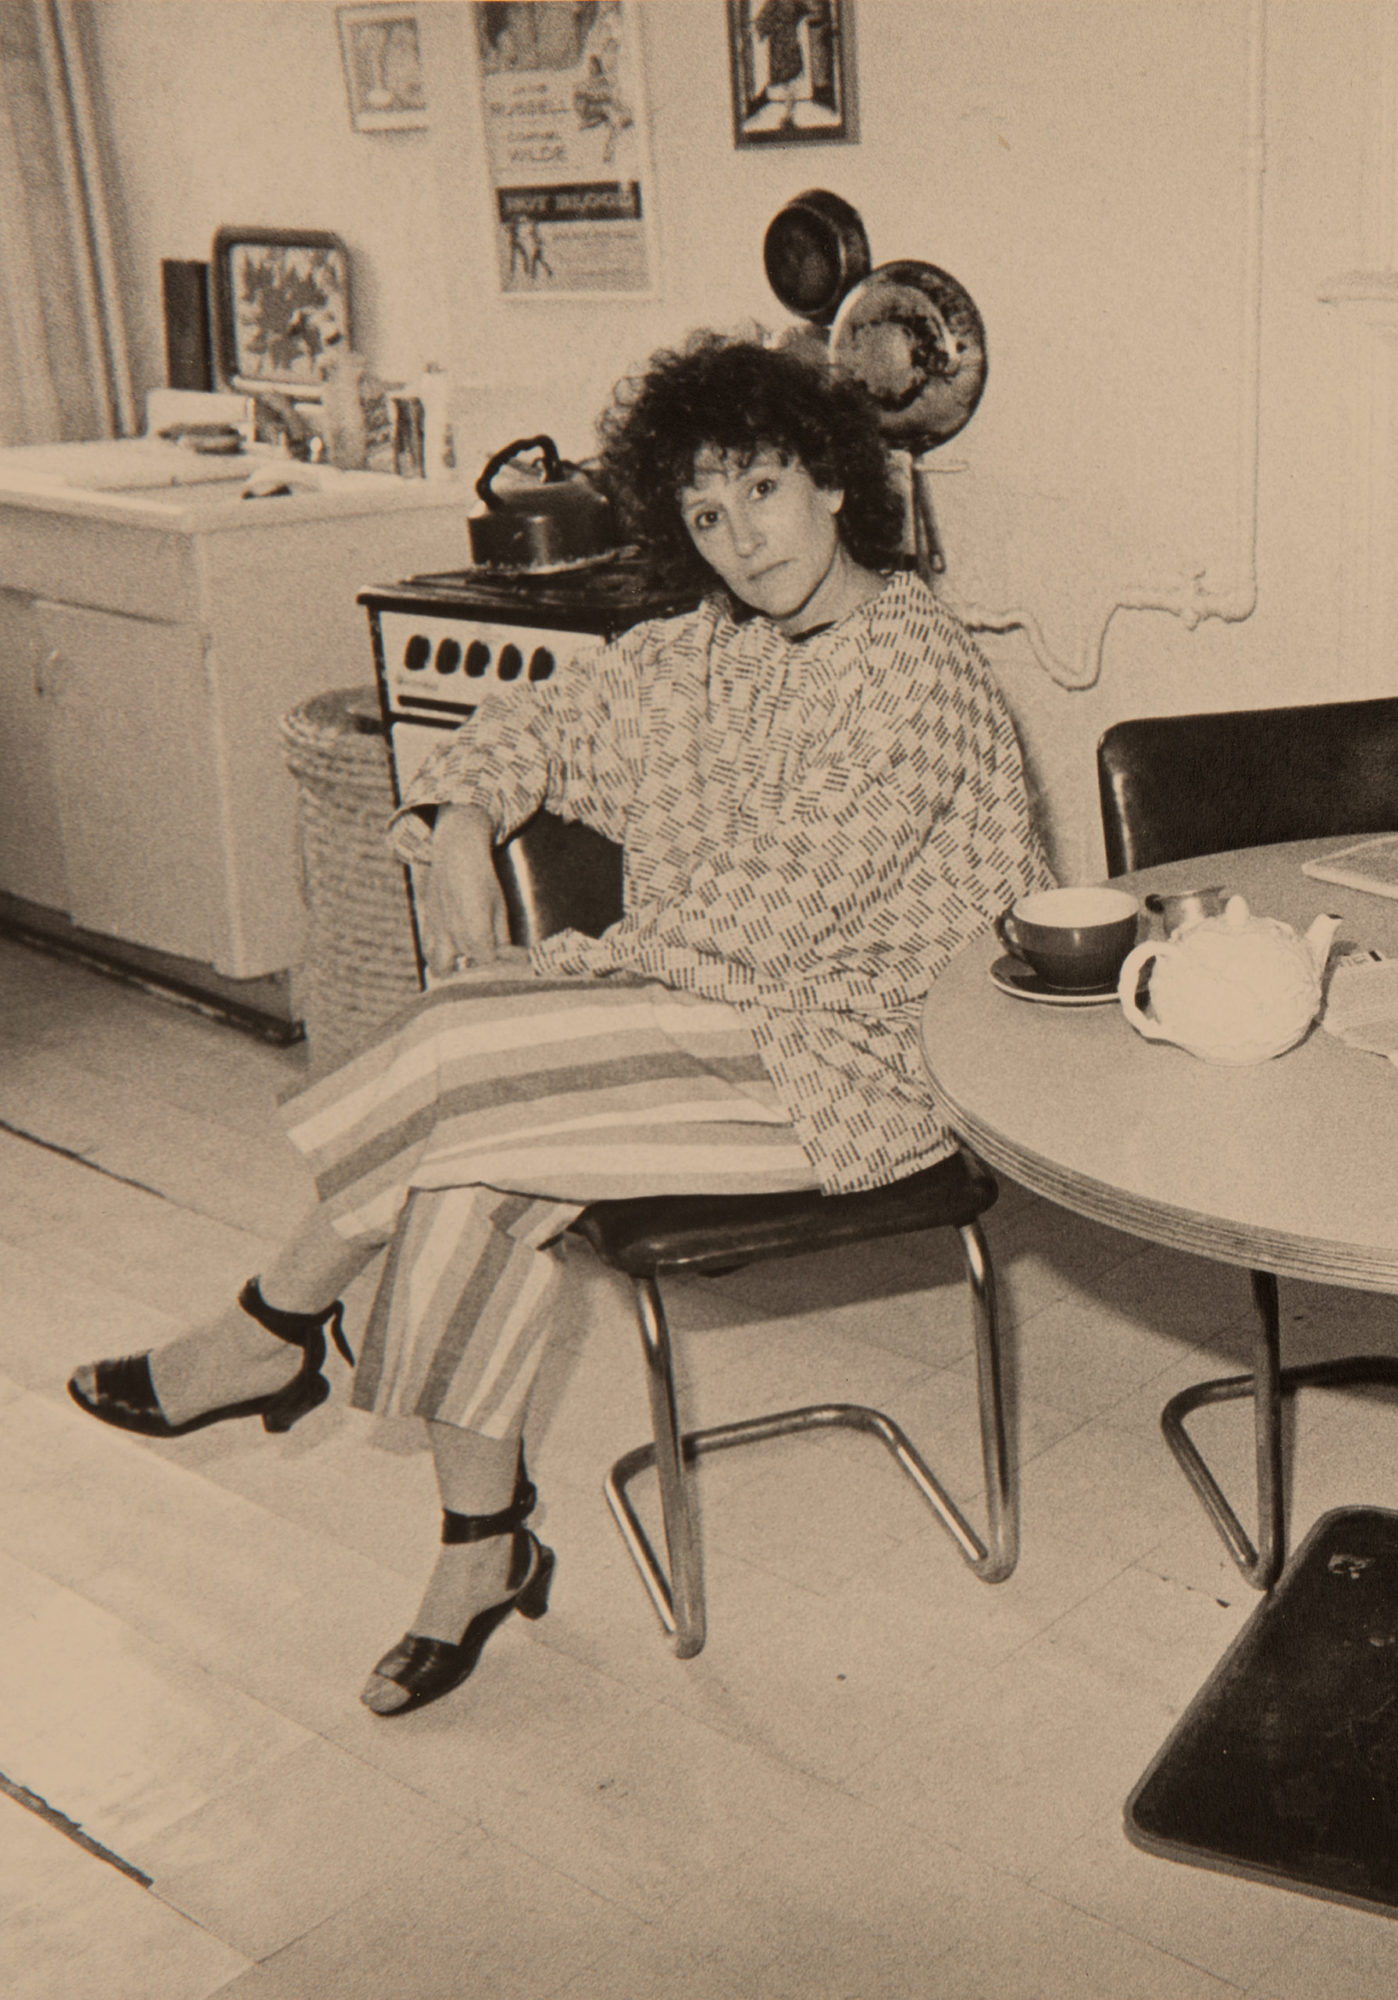 Sepia photo of a woman dressed in a patterned WilliWear jacket and striped pants sitting in a kitchen